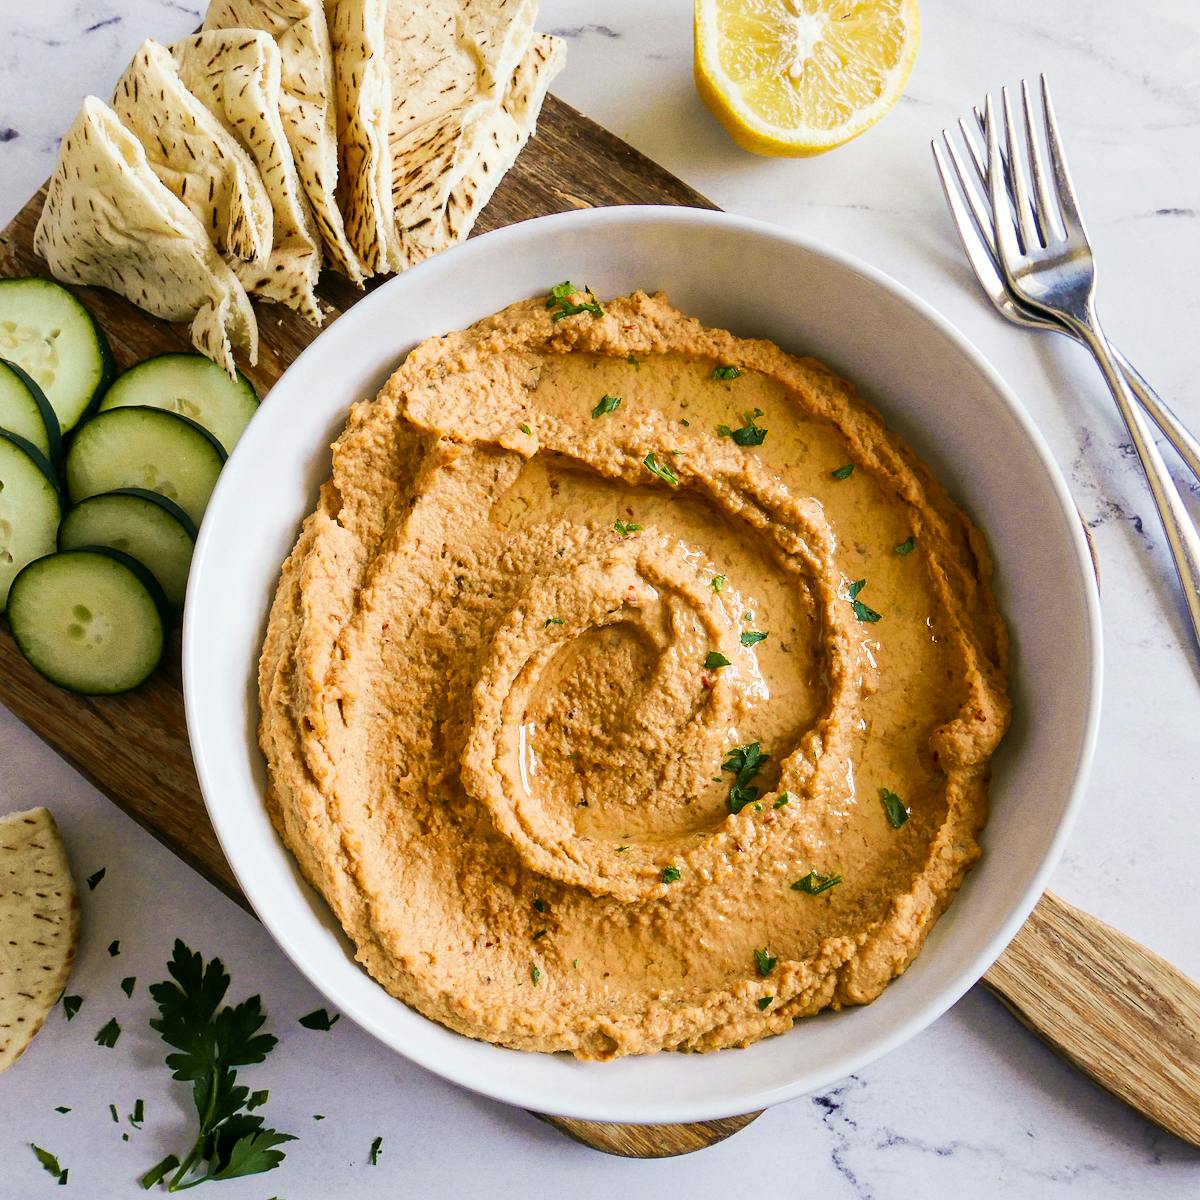 Bowl of spicy hummus garnished with olive oil and fresh parsley.